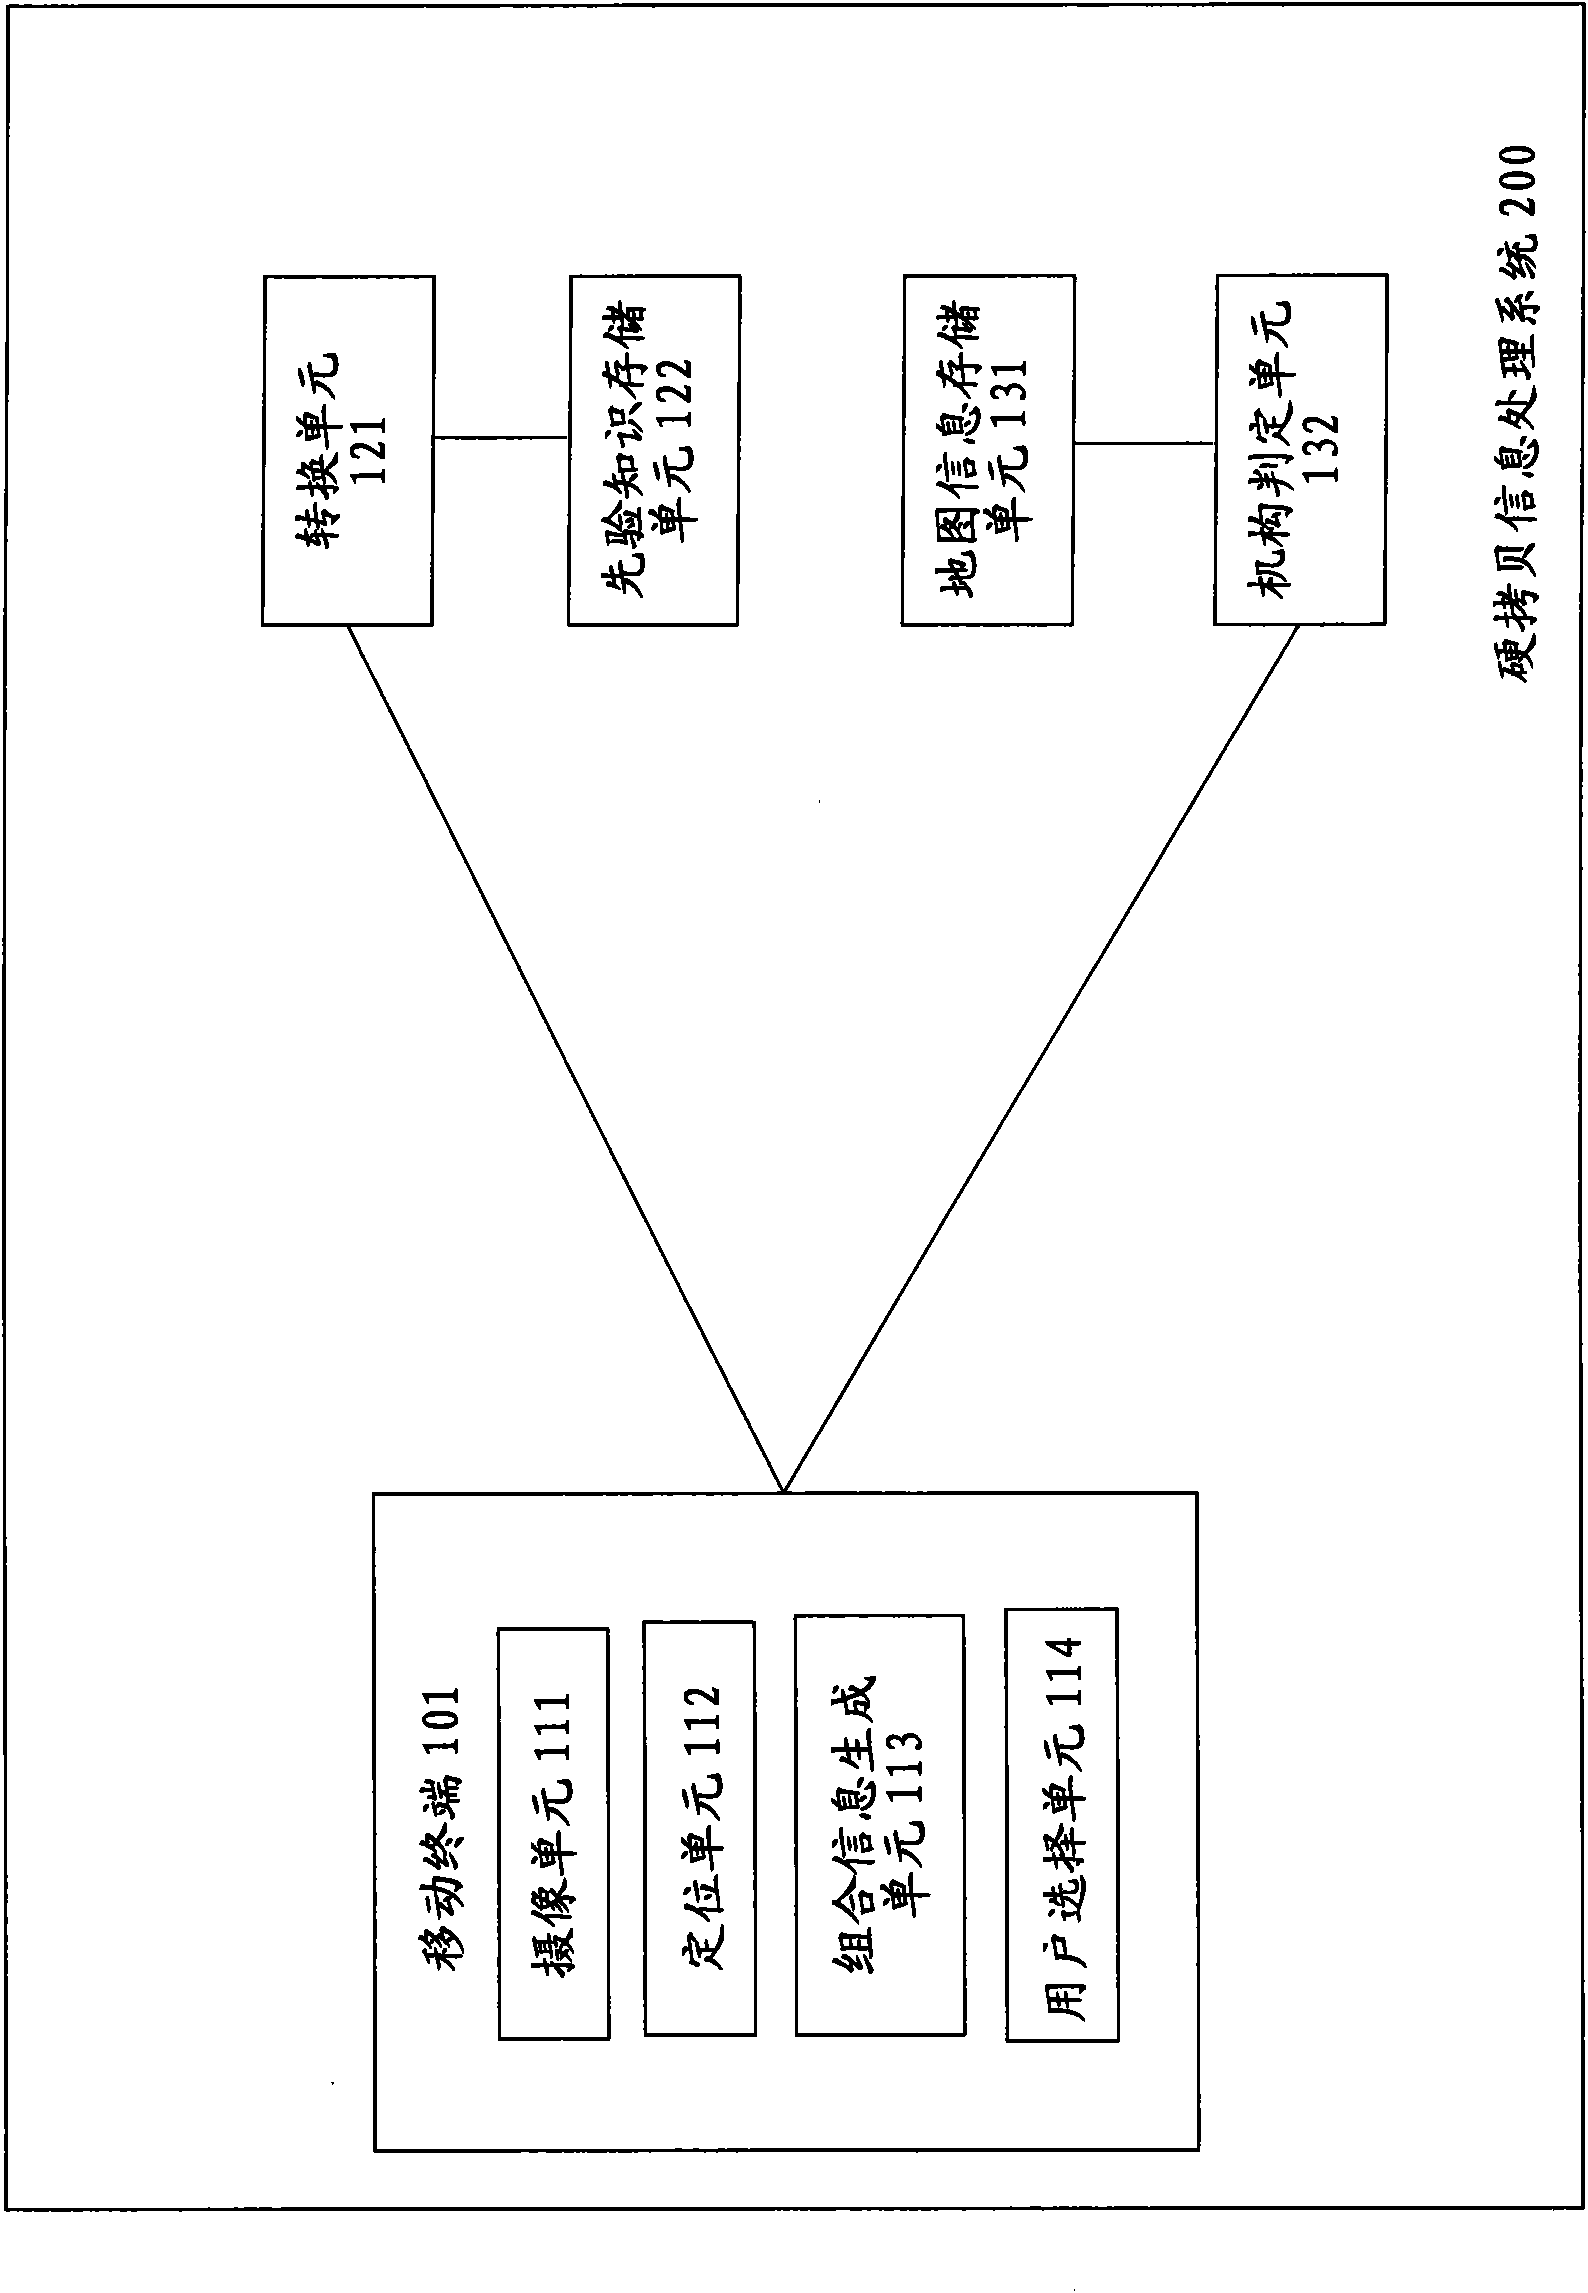 System and method for processing hardcopy information